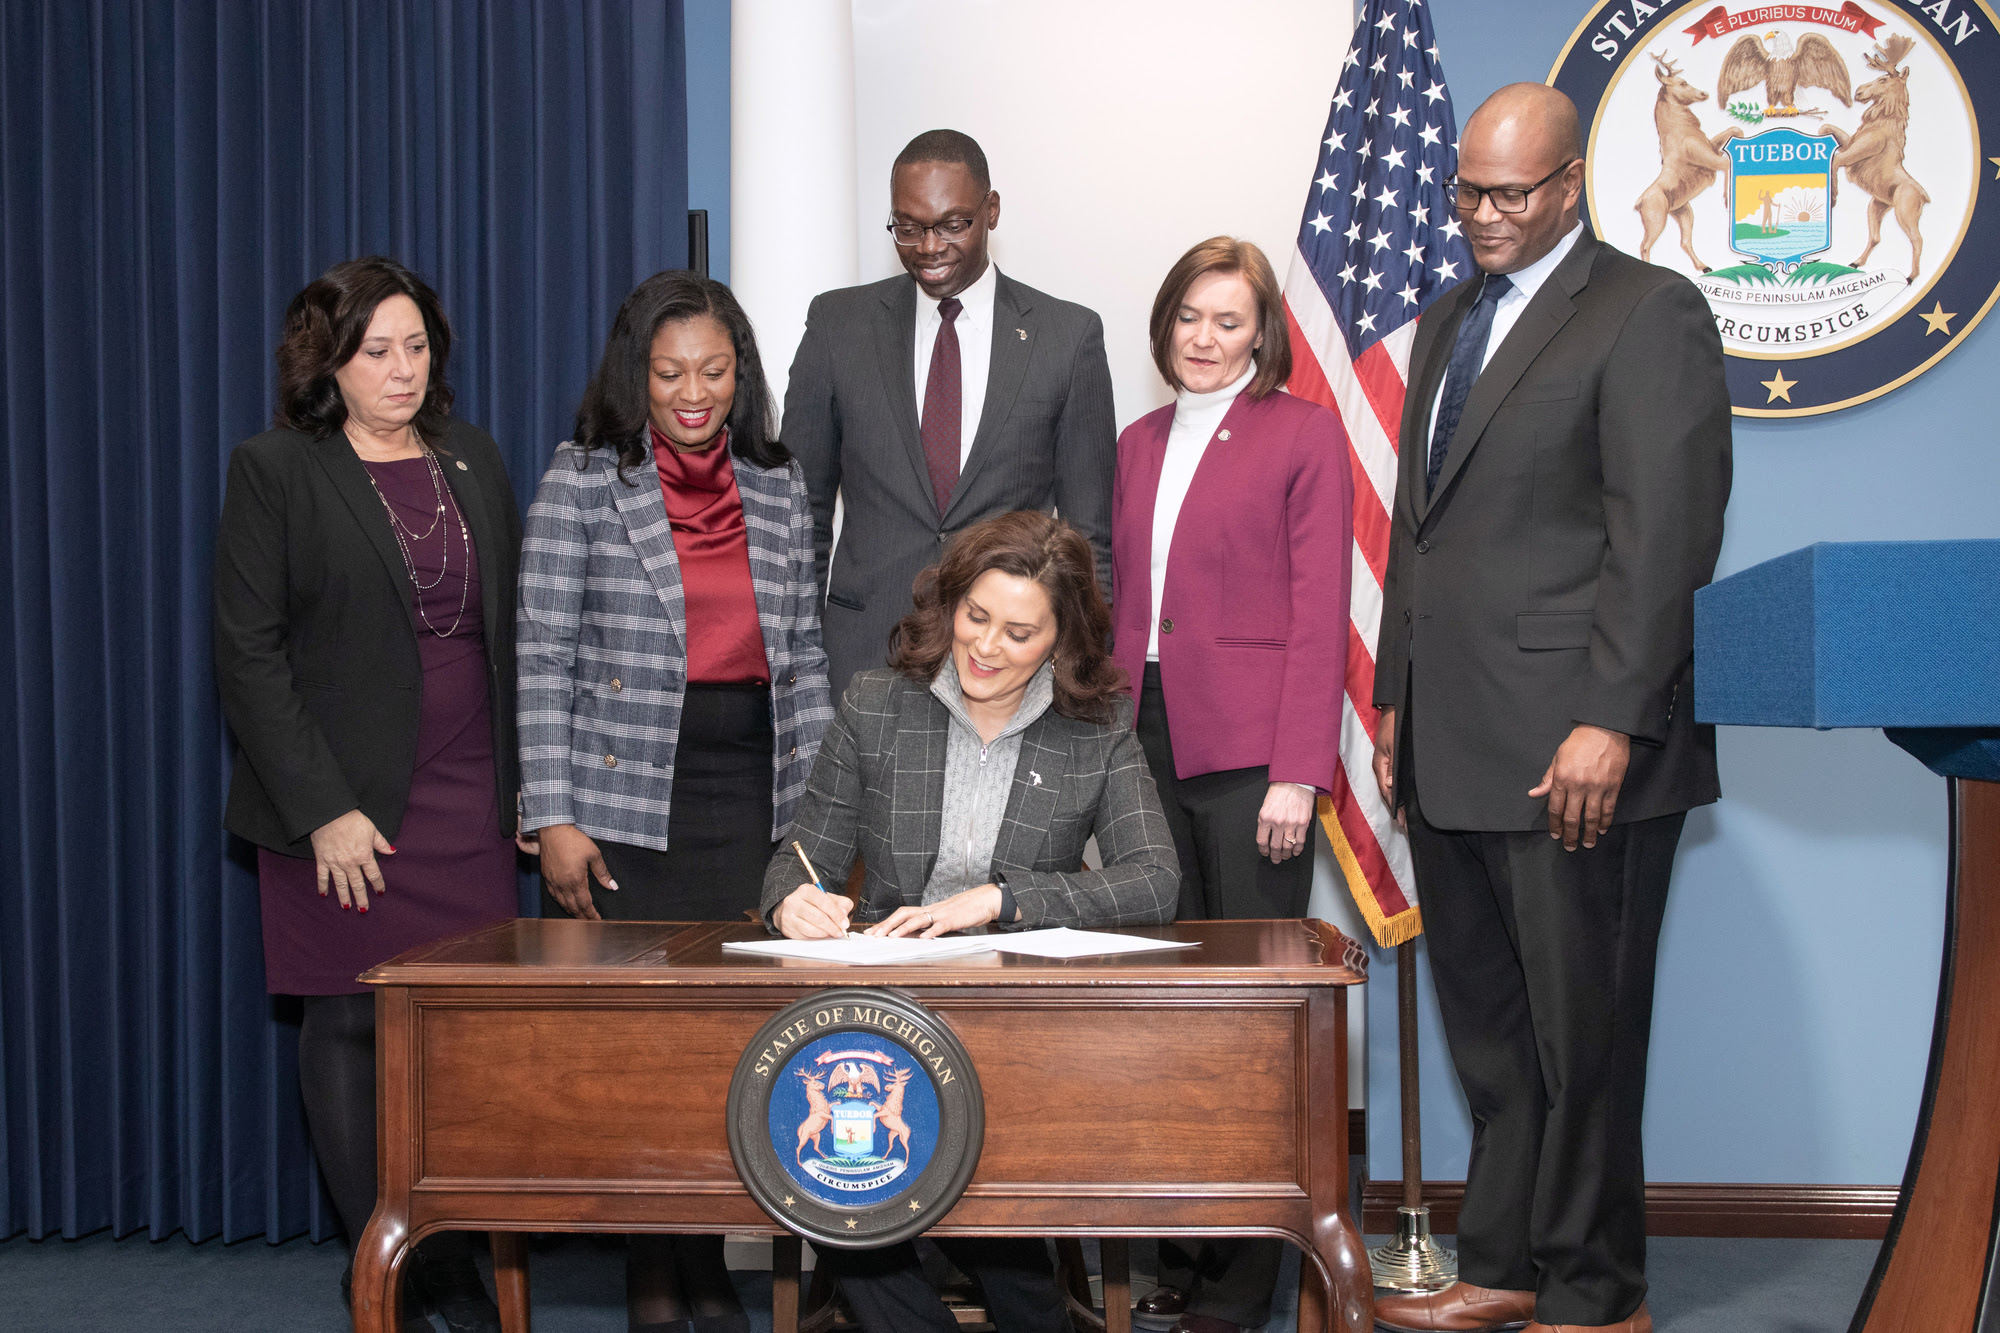 Legislation signed by Gov. Whitmer to help the communities of Michigan 